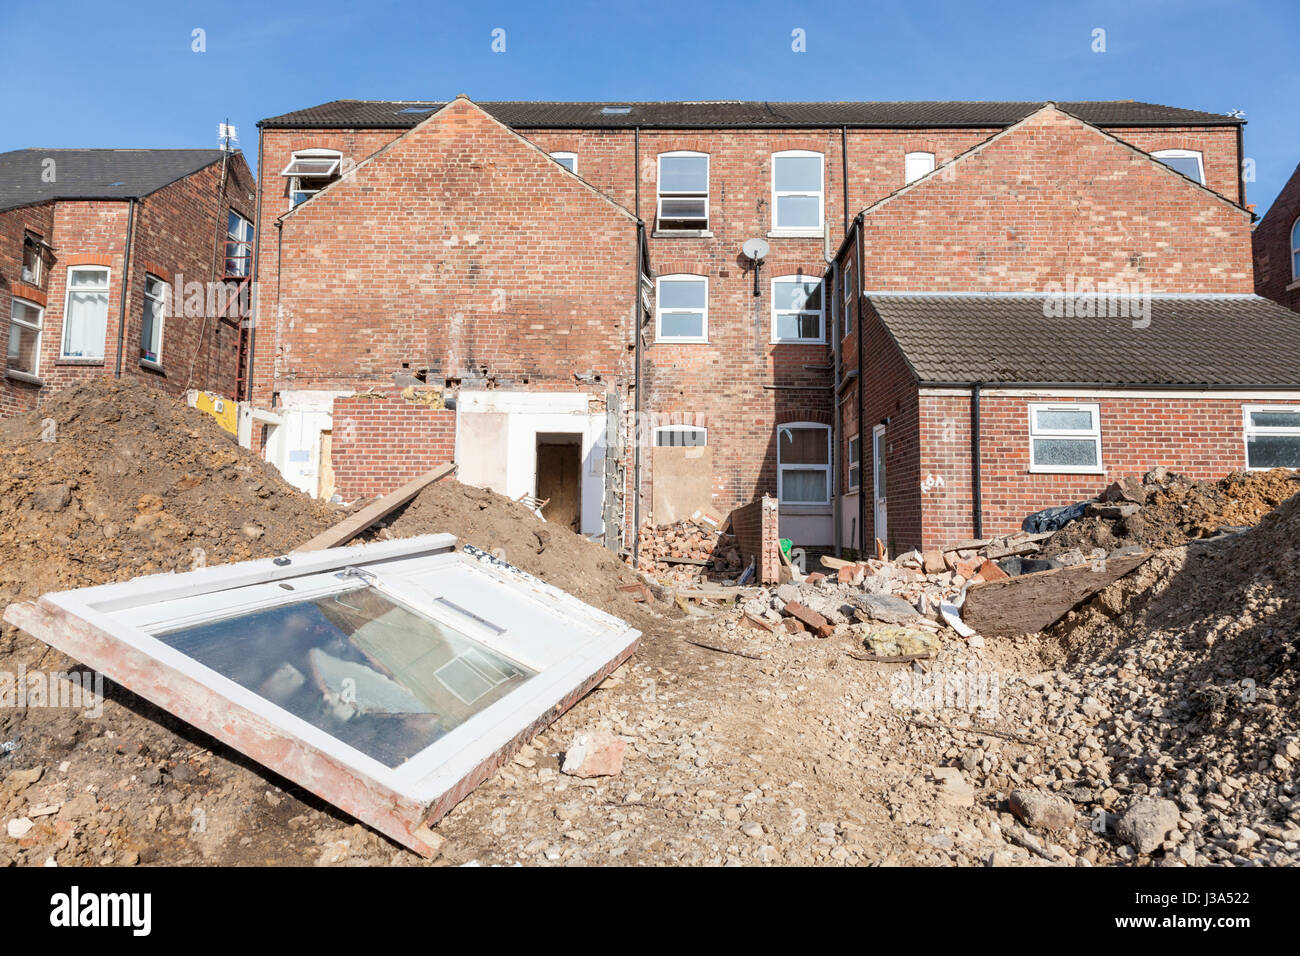 Renovating old houses. Building site with house renovation work on old terraced housing, Nottinghamshire, England, UK Stock Photo